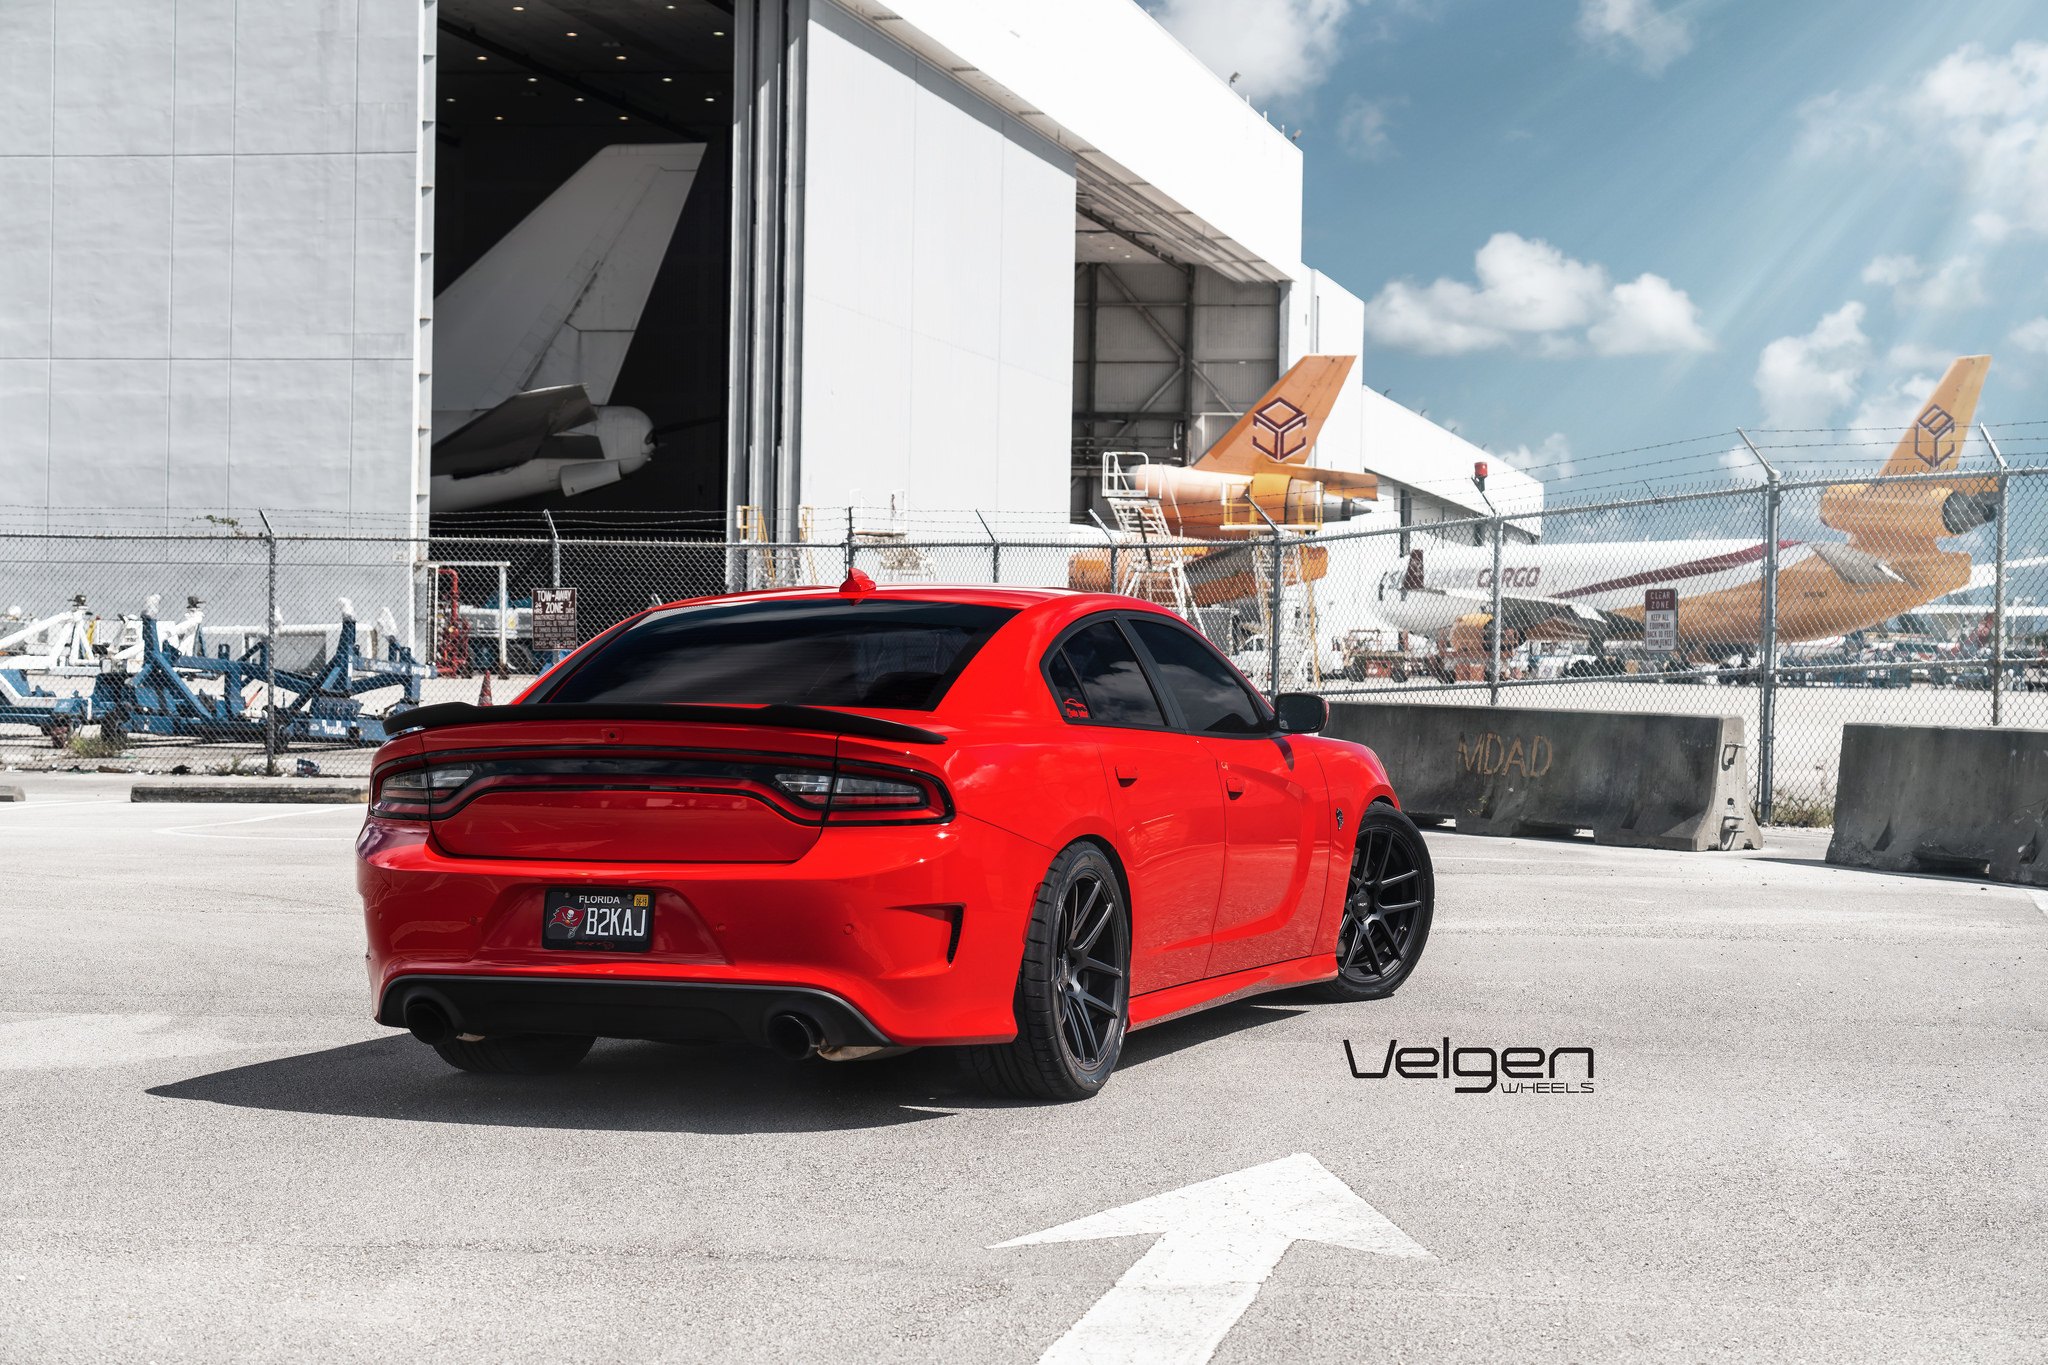 Aftermarket Rear Diffuser on Red Dodge Charger SRT - Photo by Velgen Wheels